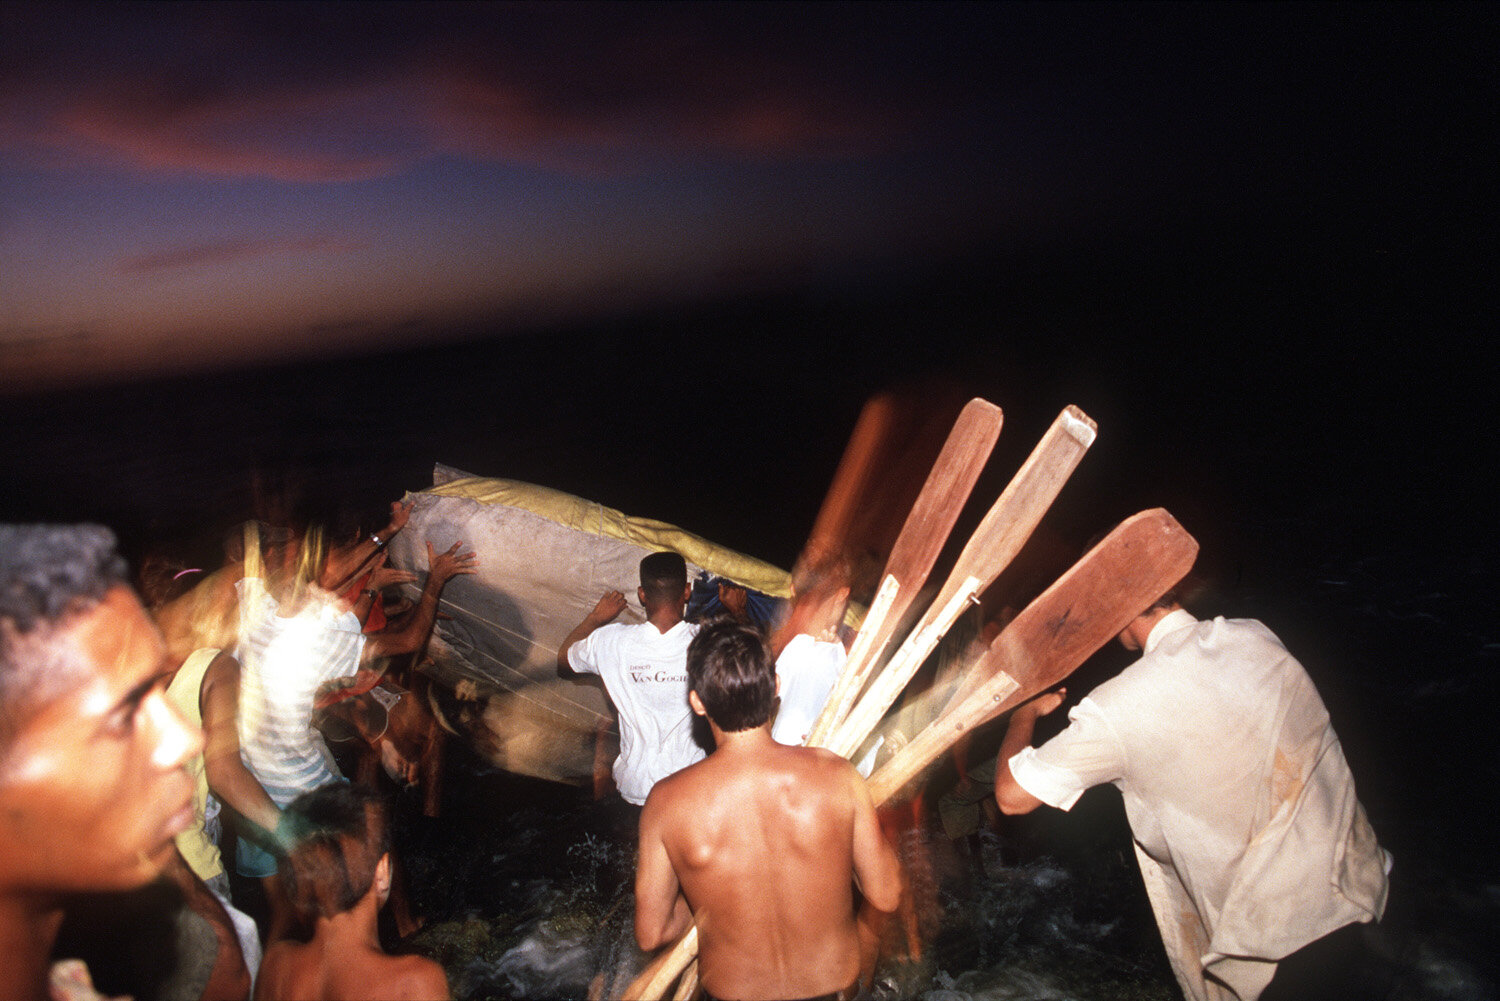  First night of the balsero boat people crisis in Cuba in which some 35.000 left the island. 